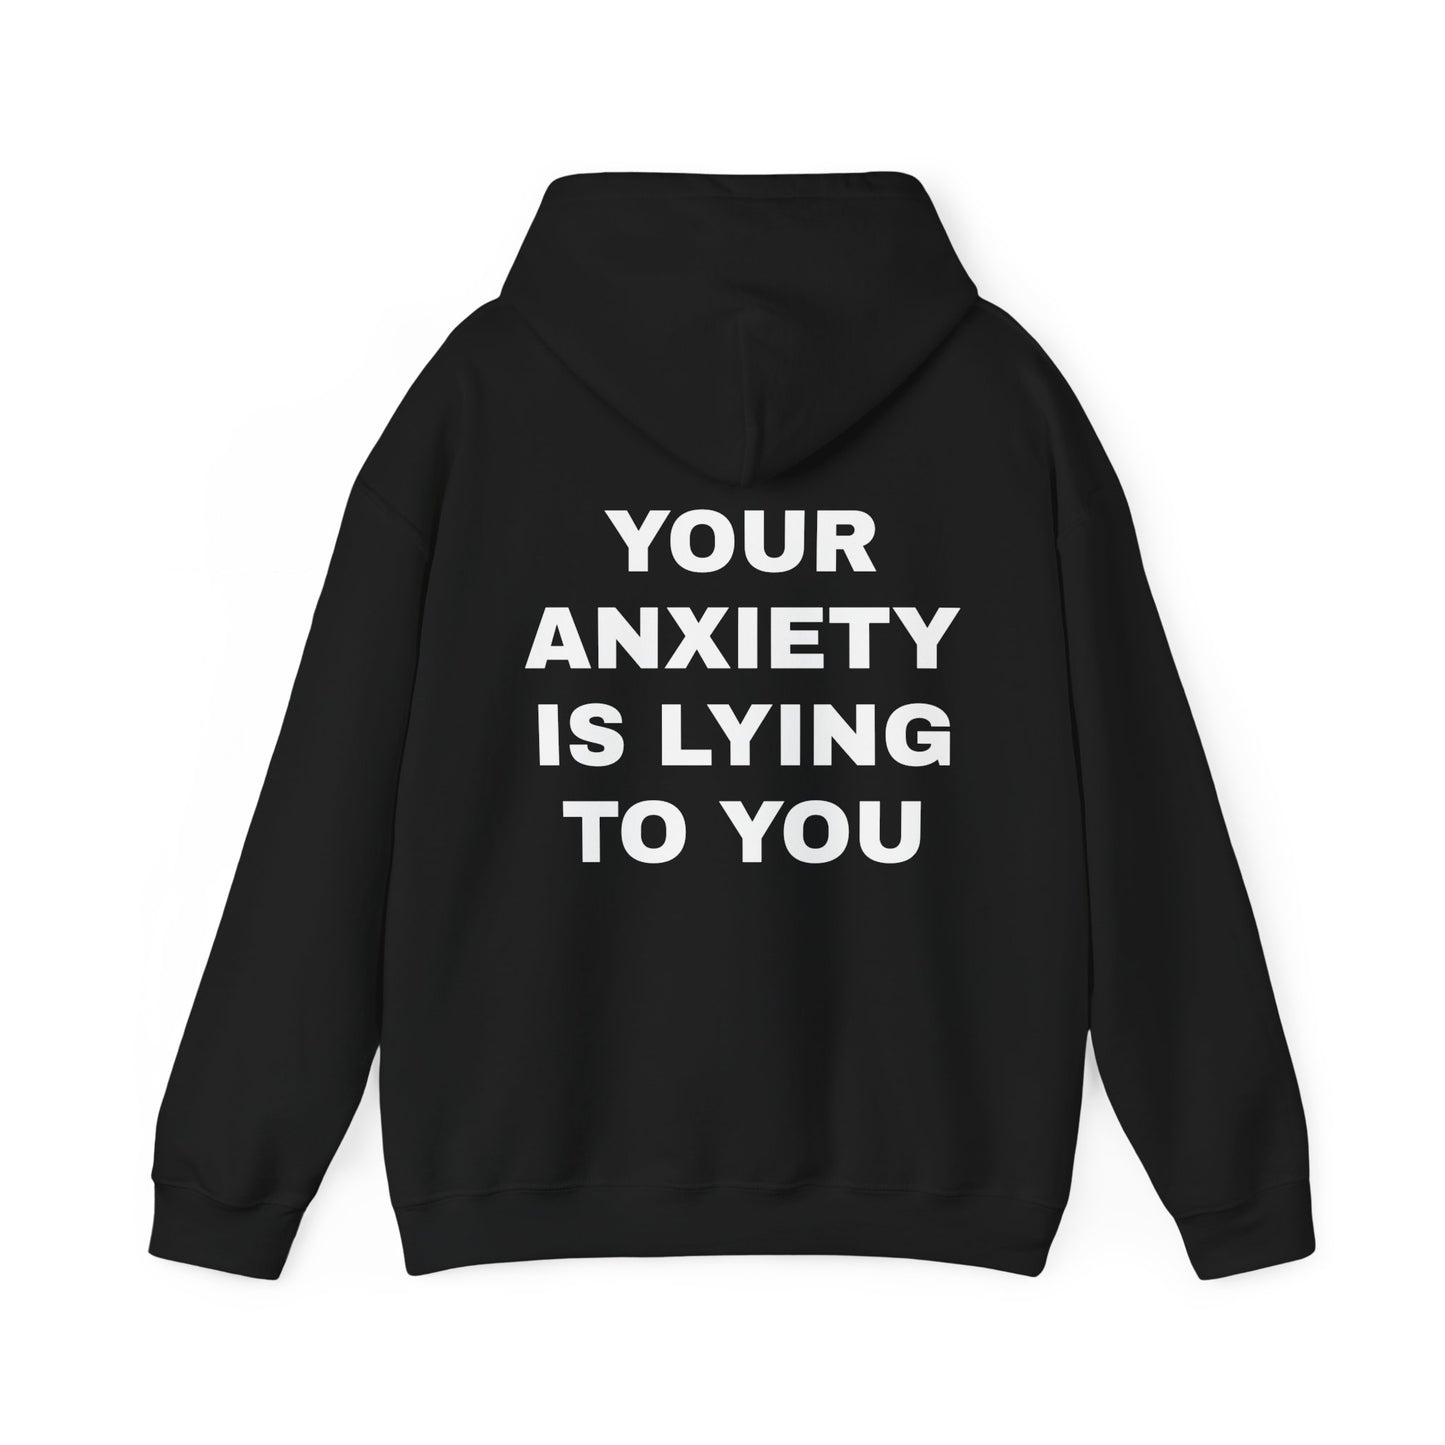 YOUR ANXIETY IS LYING TO YOU Bluza UNISEX